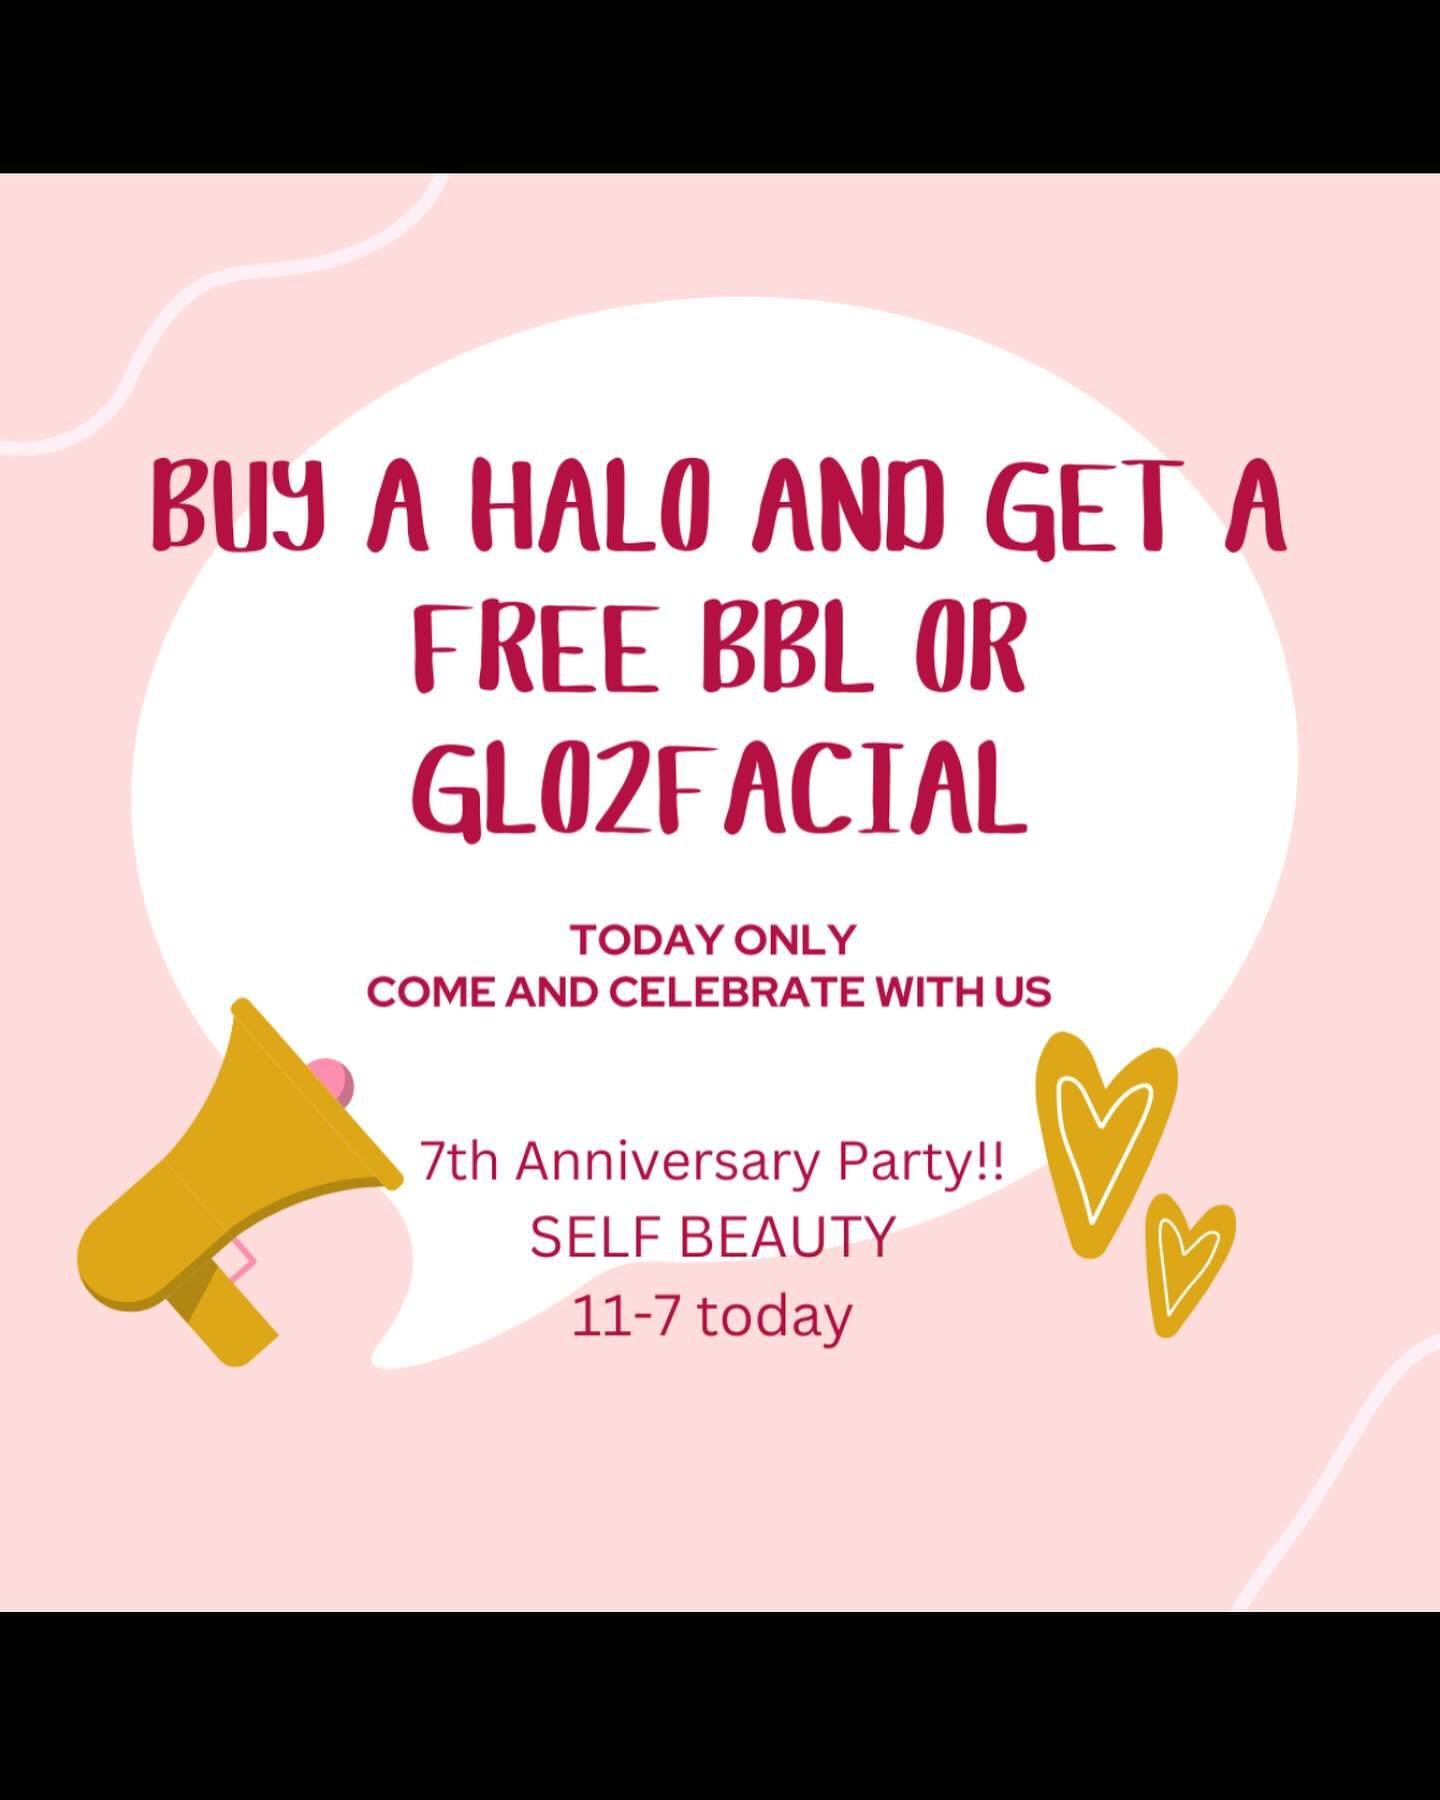 Come celebrate Self Beauty&rsquo;s 7th Anniversary today!  We have so many specials so come in and see us!  Just for coming, you receive $1 off per unit of Botox at your next appointment and you&rsquo;re entered to win a FREE Glo2facial.  Open house 